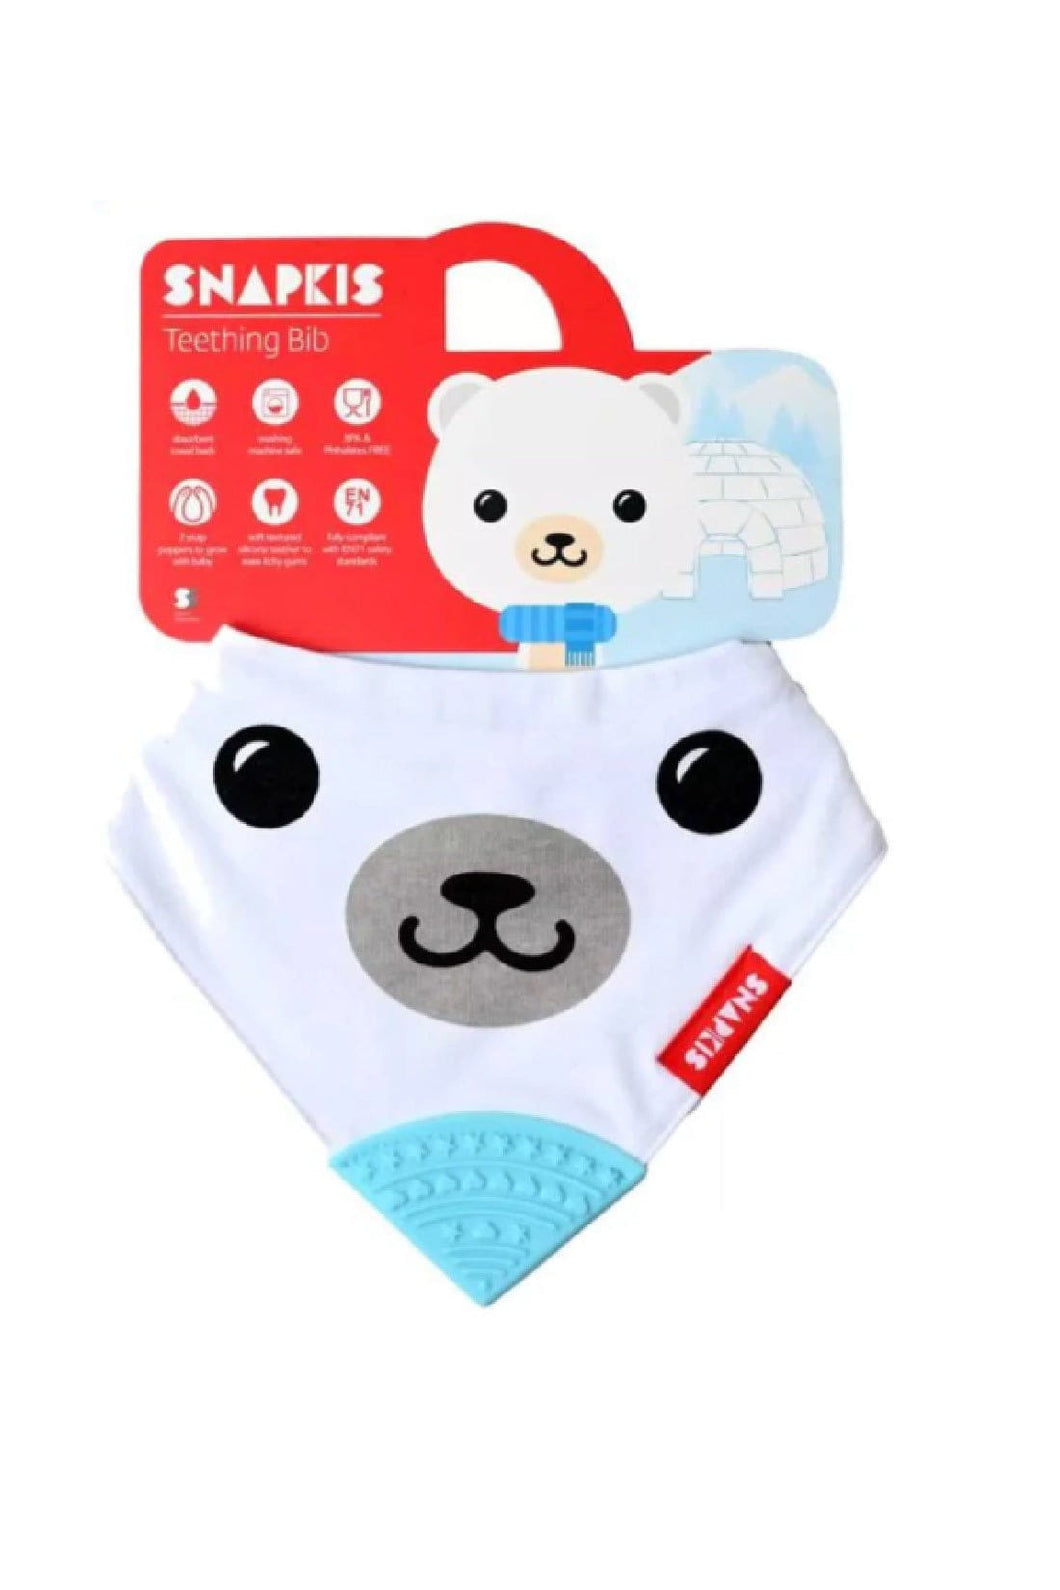 Snapkis Teething Bib with Silicone Teether 1